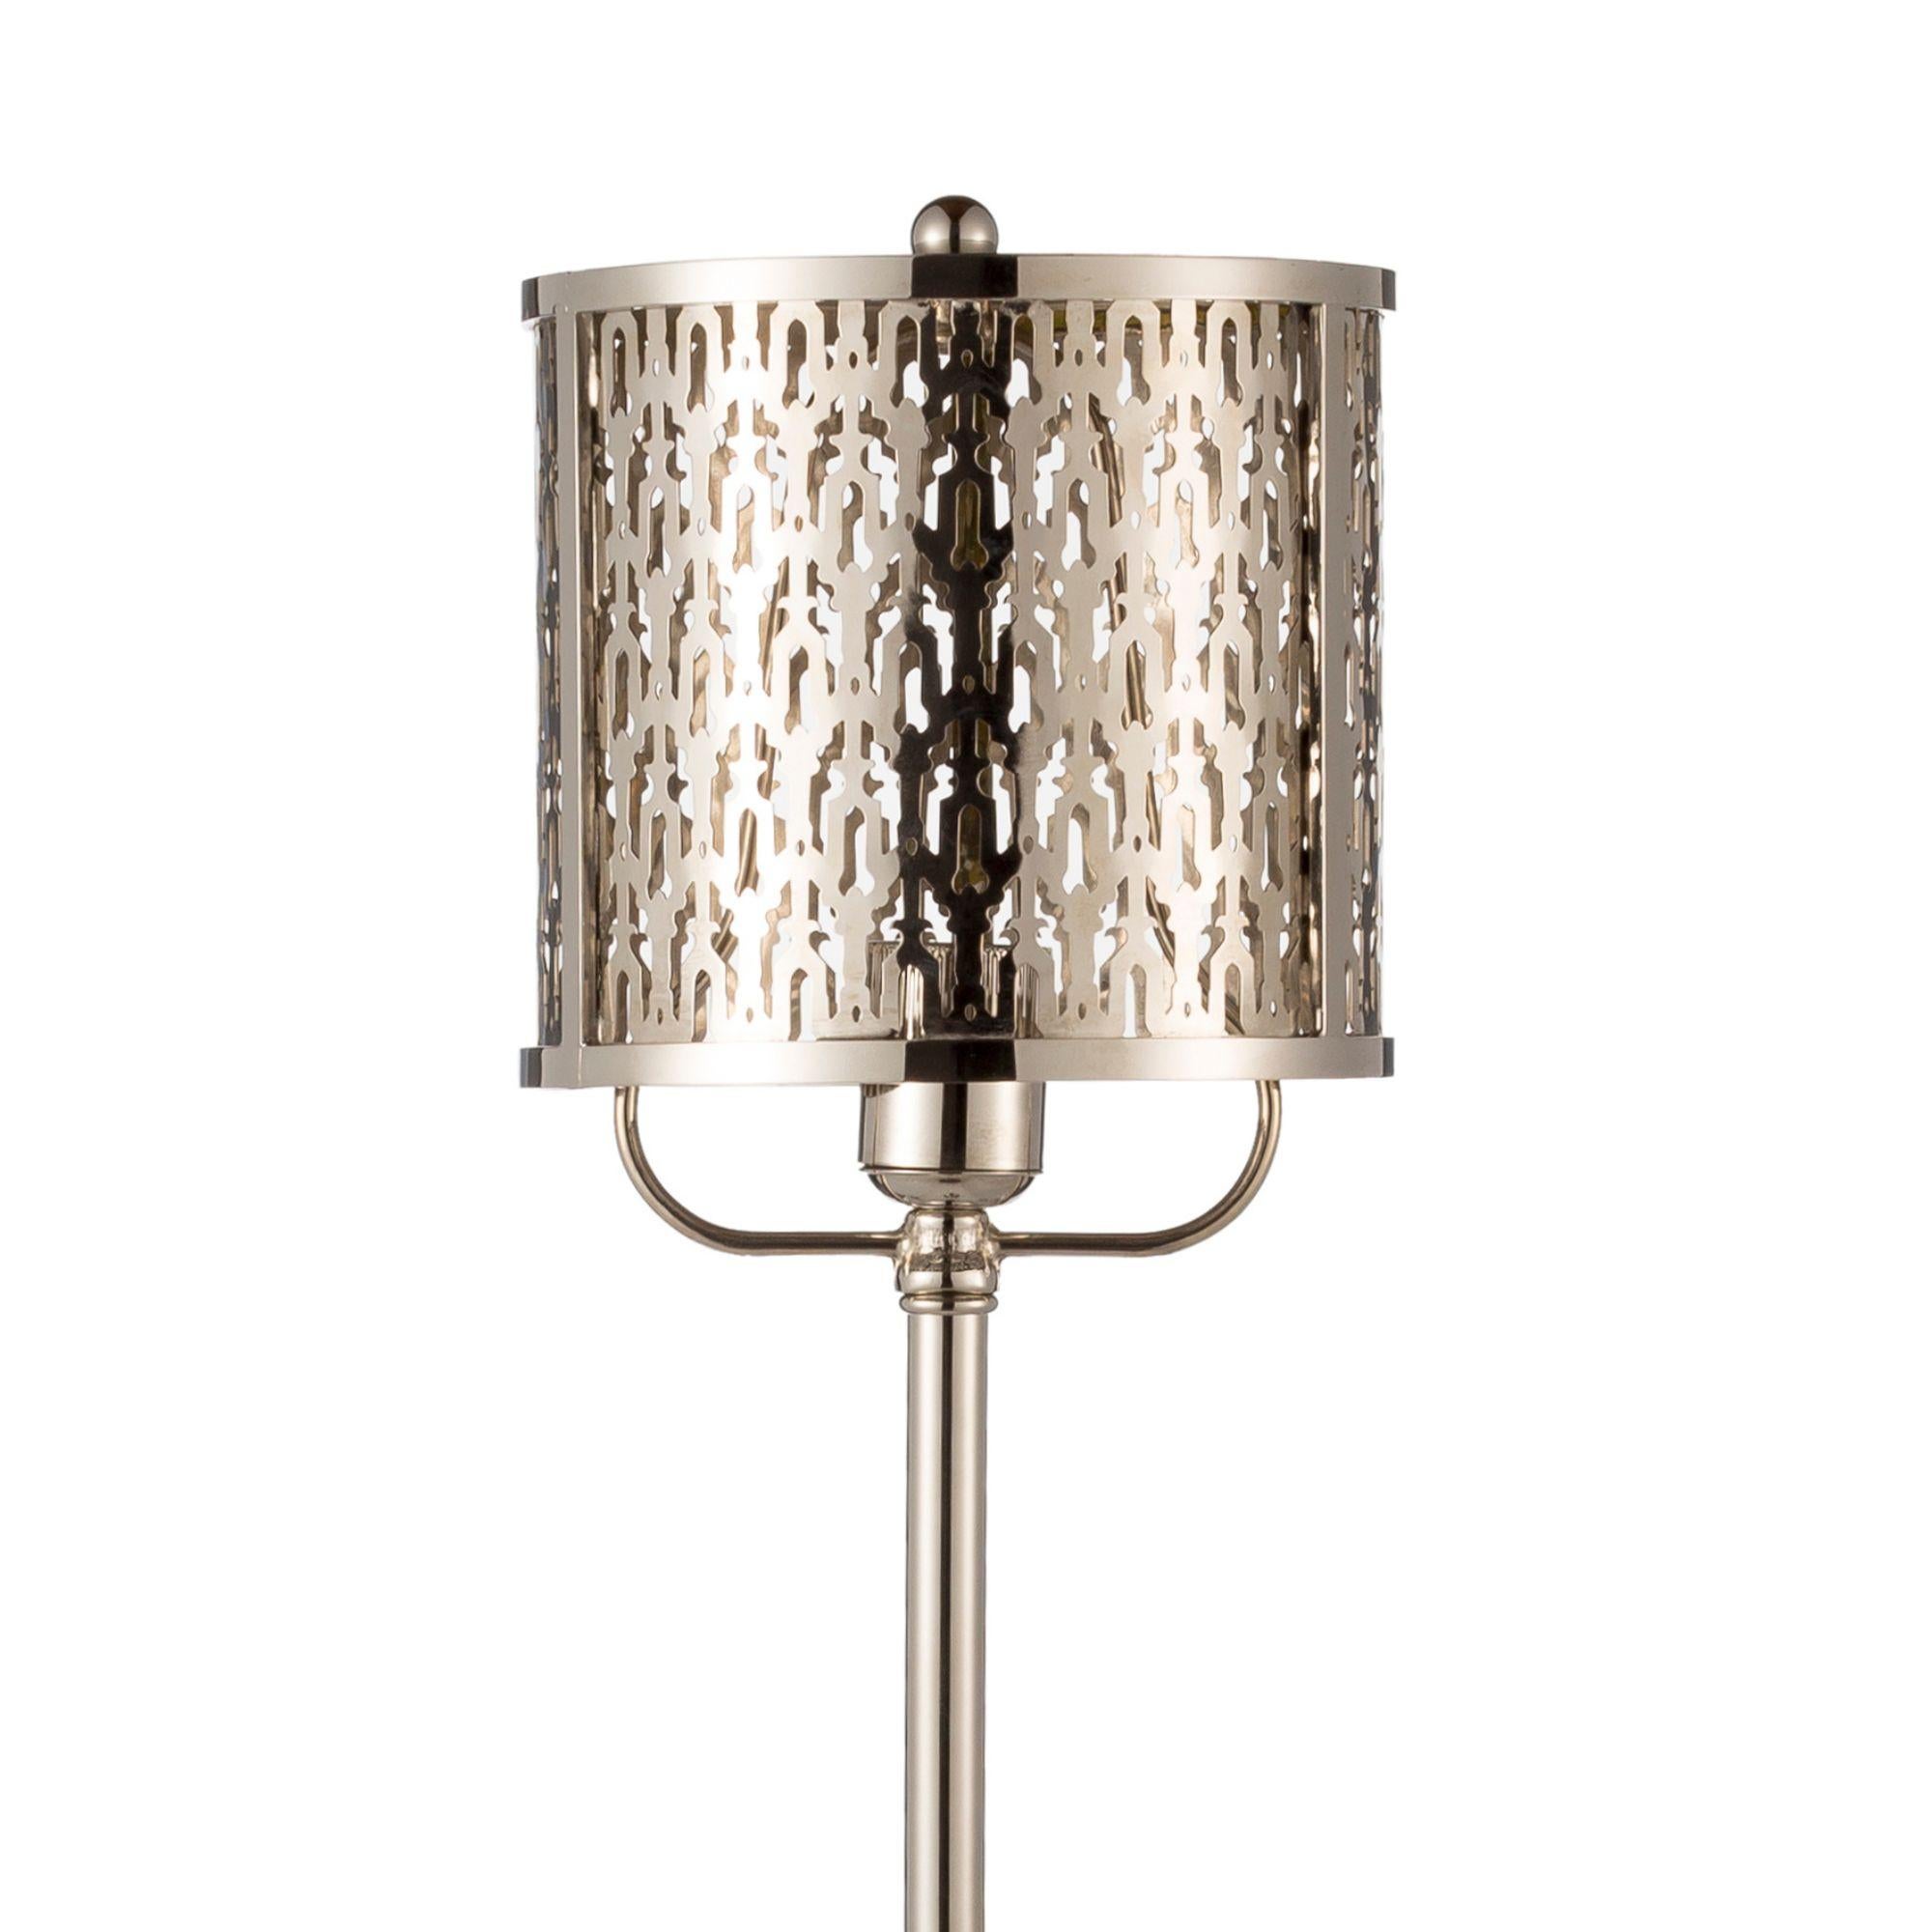 Metalwork Adjustable Floor Lamp with Naural Brass Structure and Jointed Arms For Sale